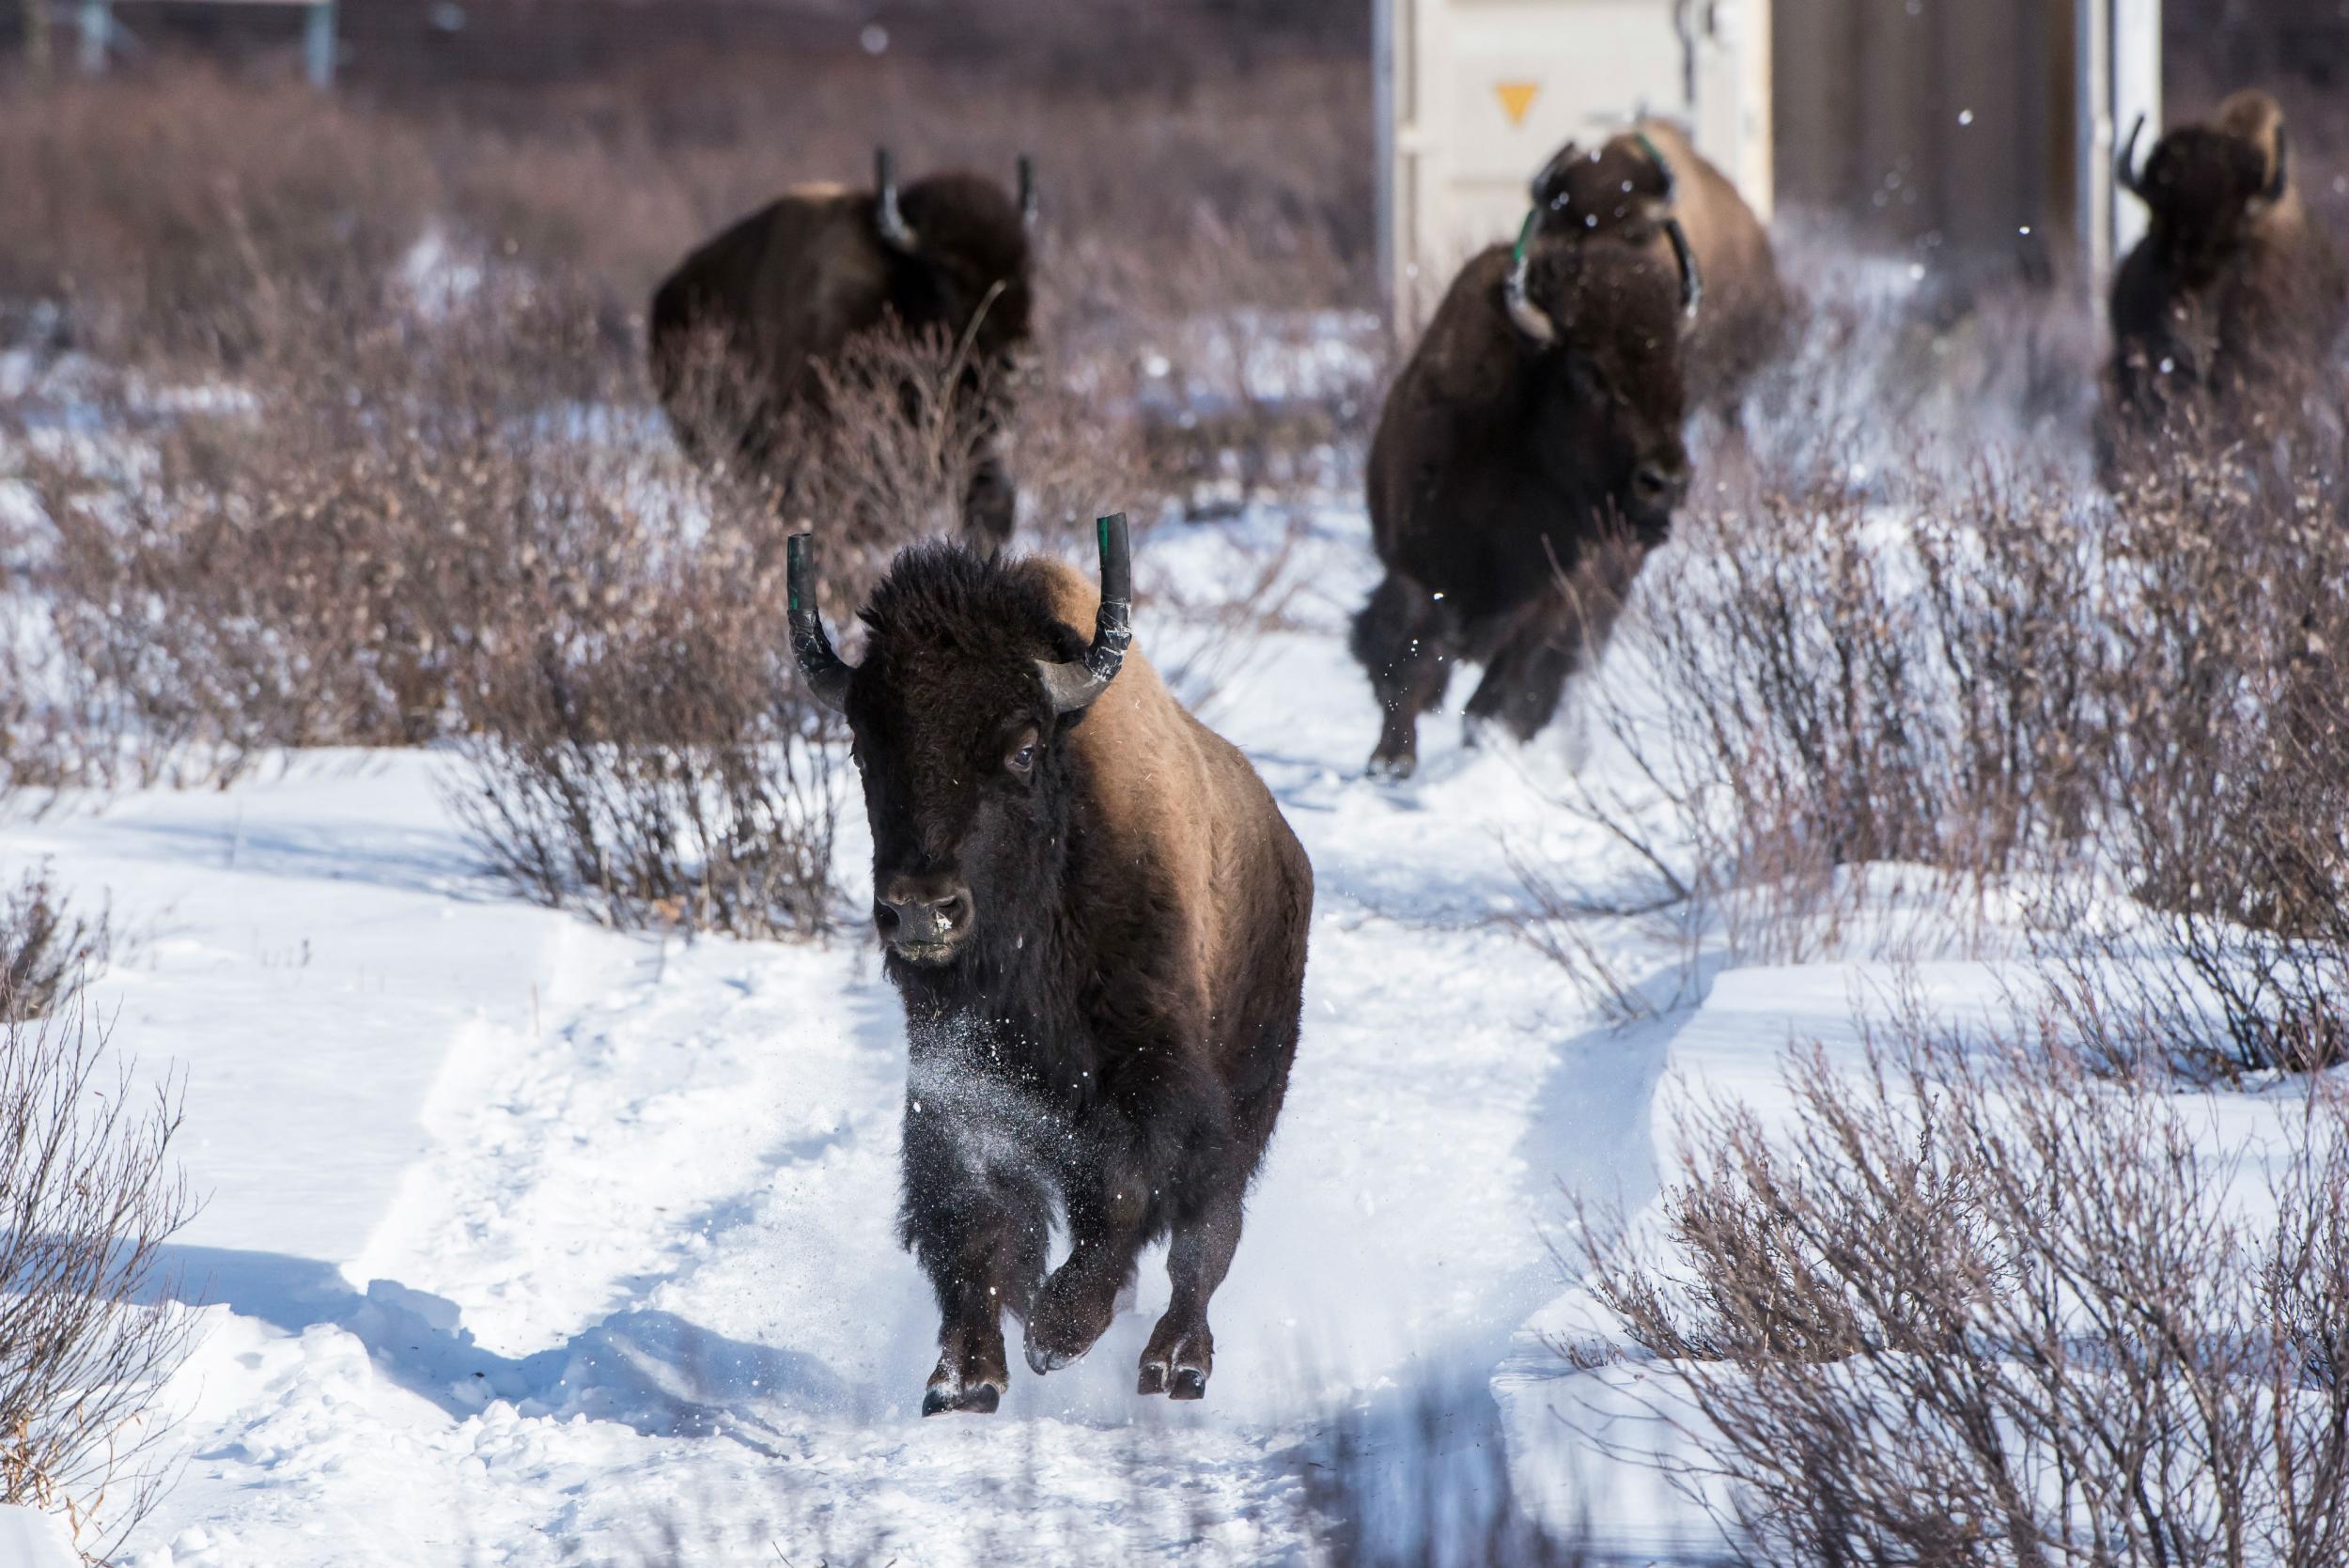 A total of 16 bison were released by officials